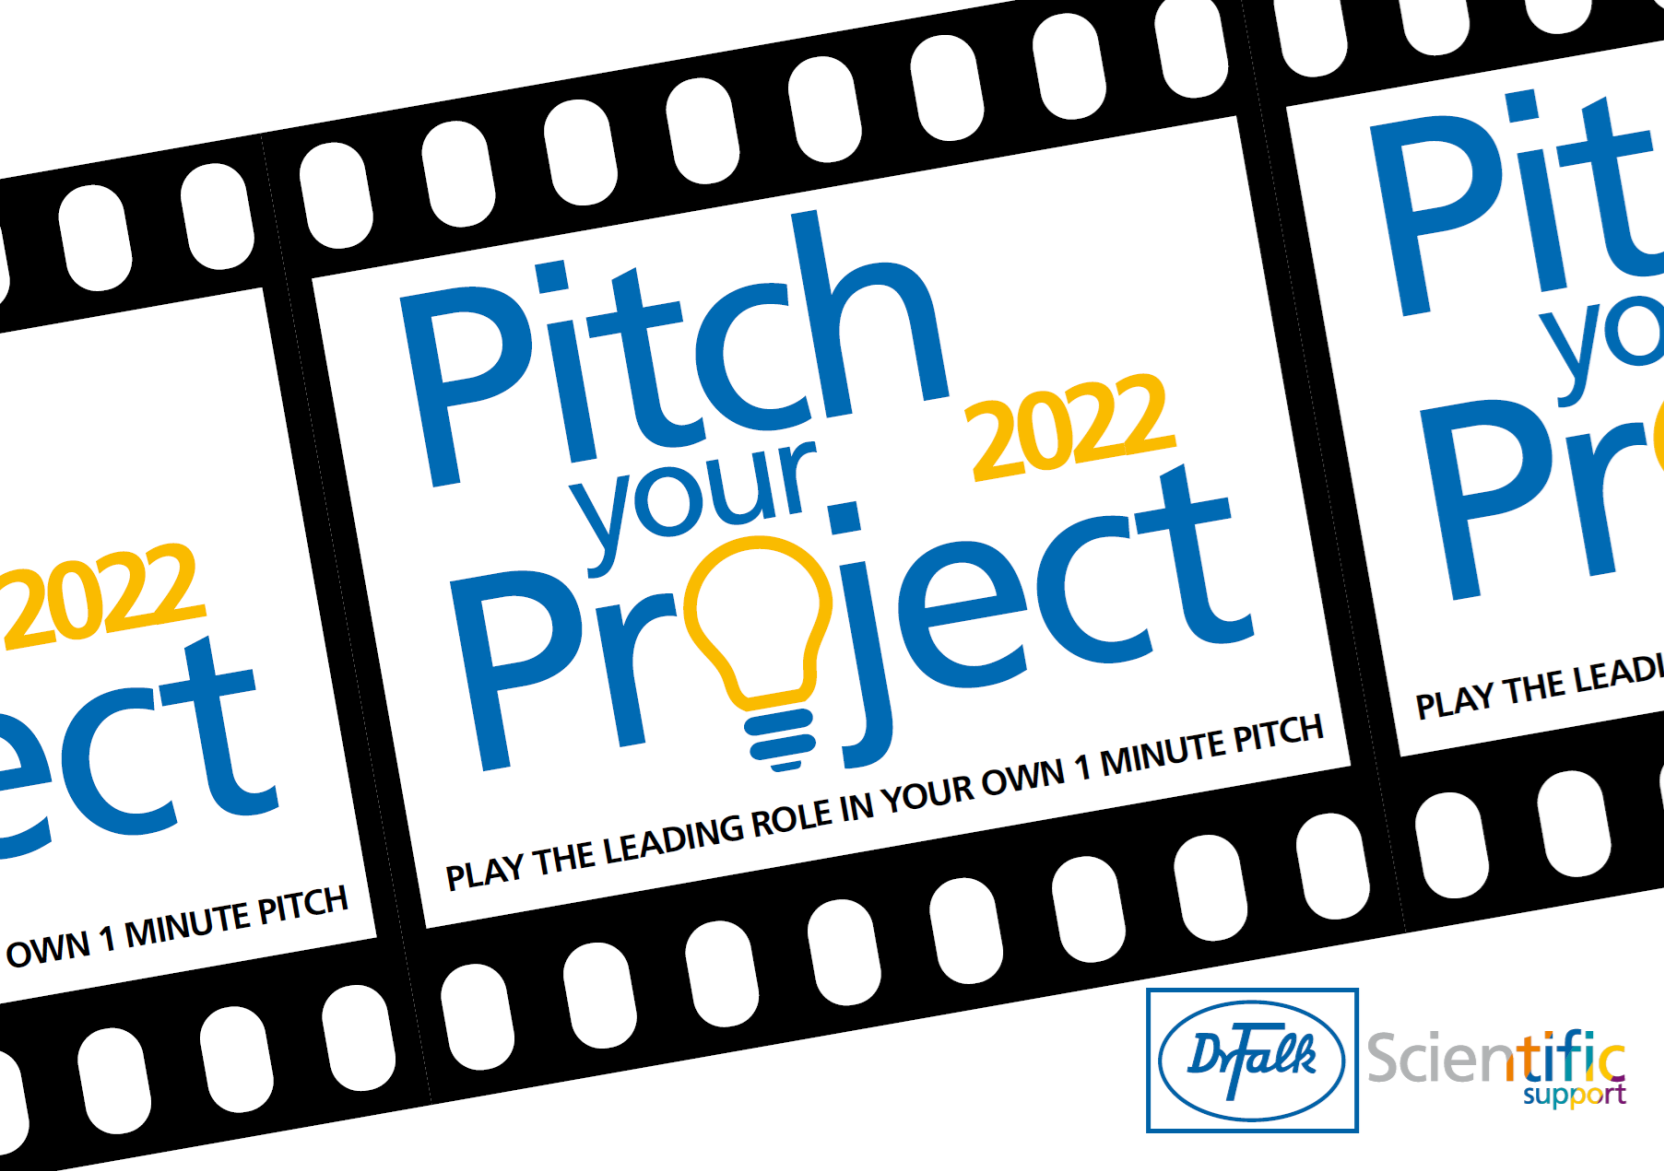 Pitch your Project